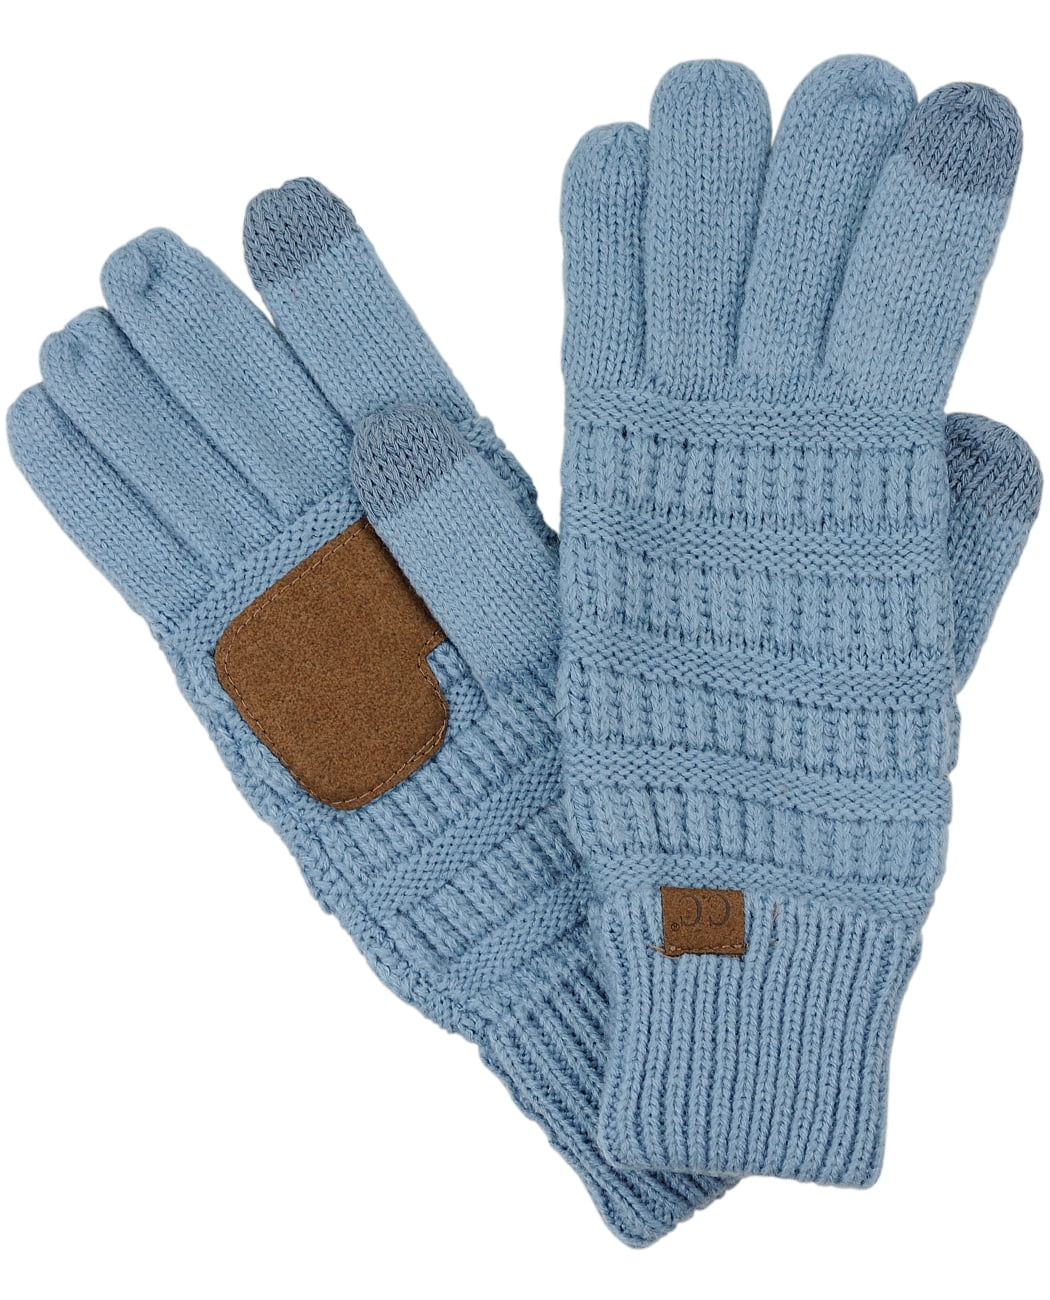 C.C Unisex Cable Knit Winter Warm Anti-Slip Touchscreen Texting Gloves 